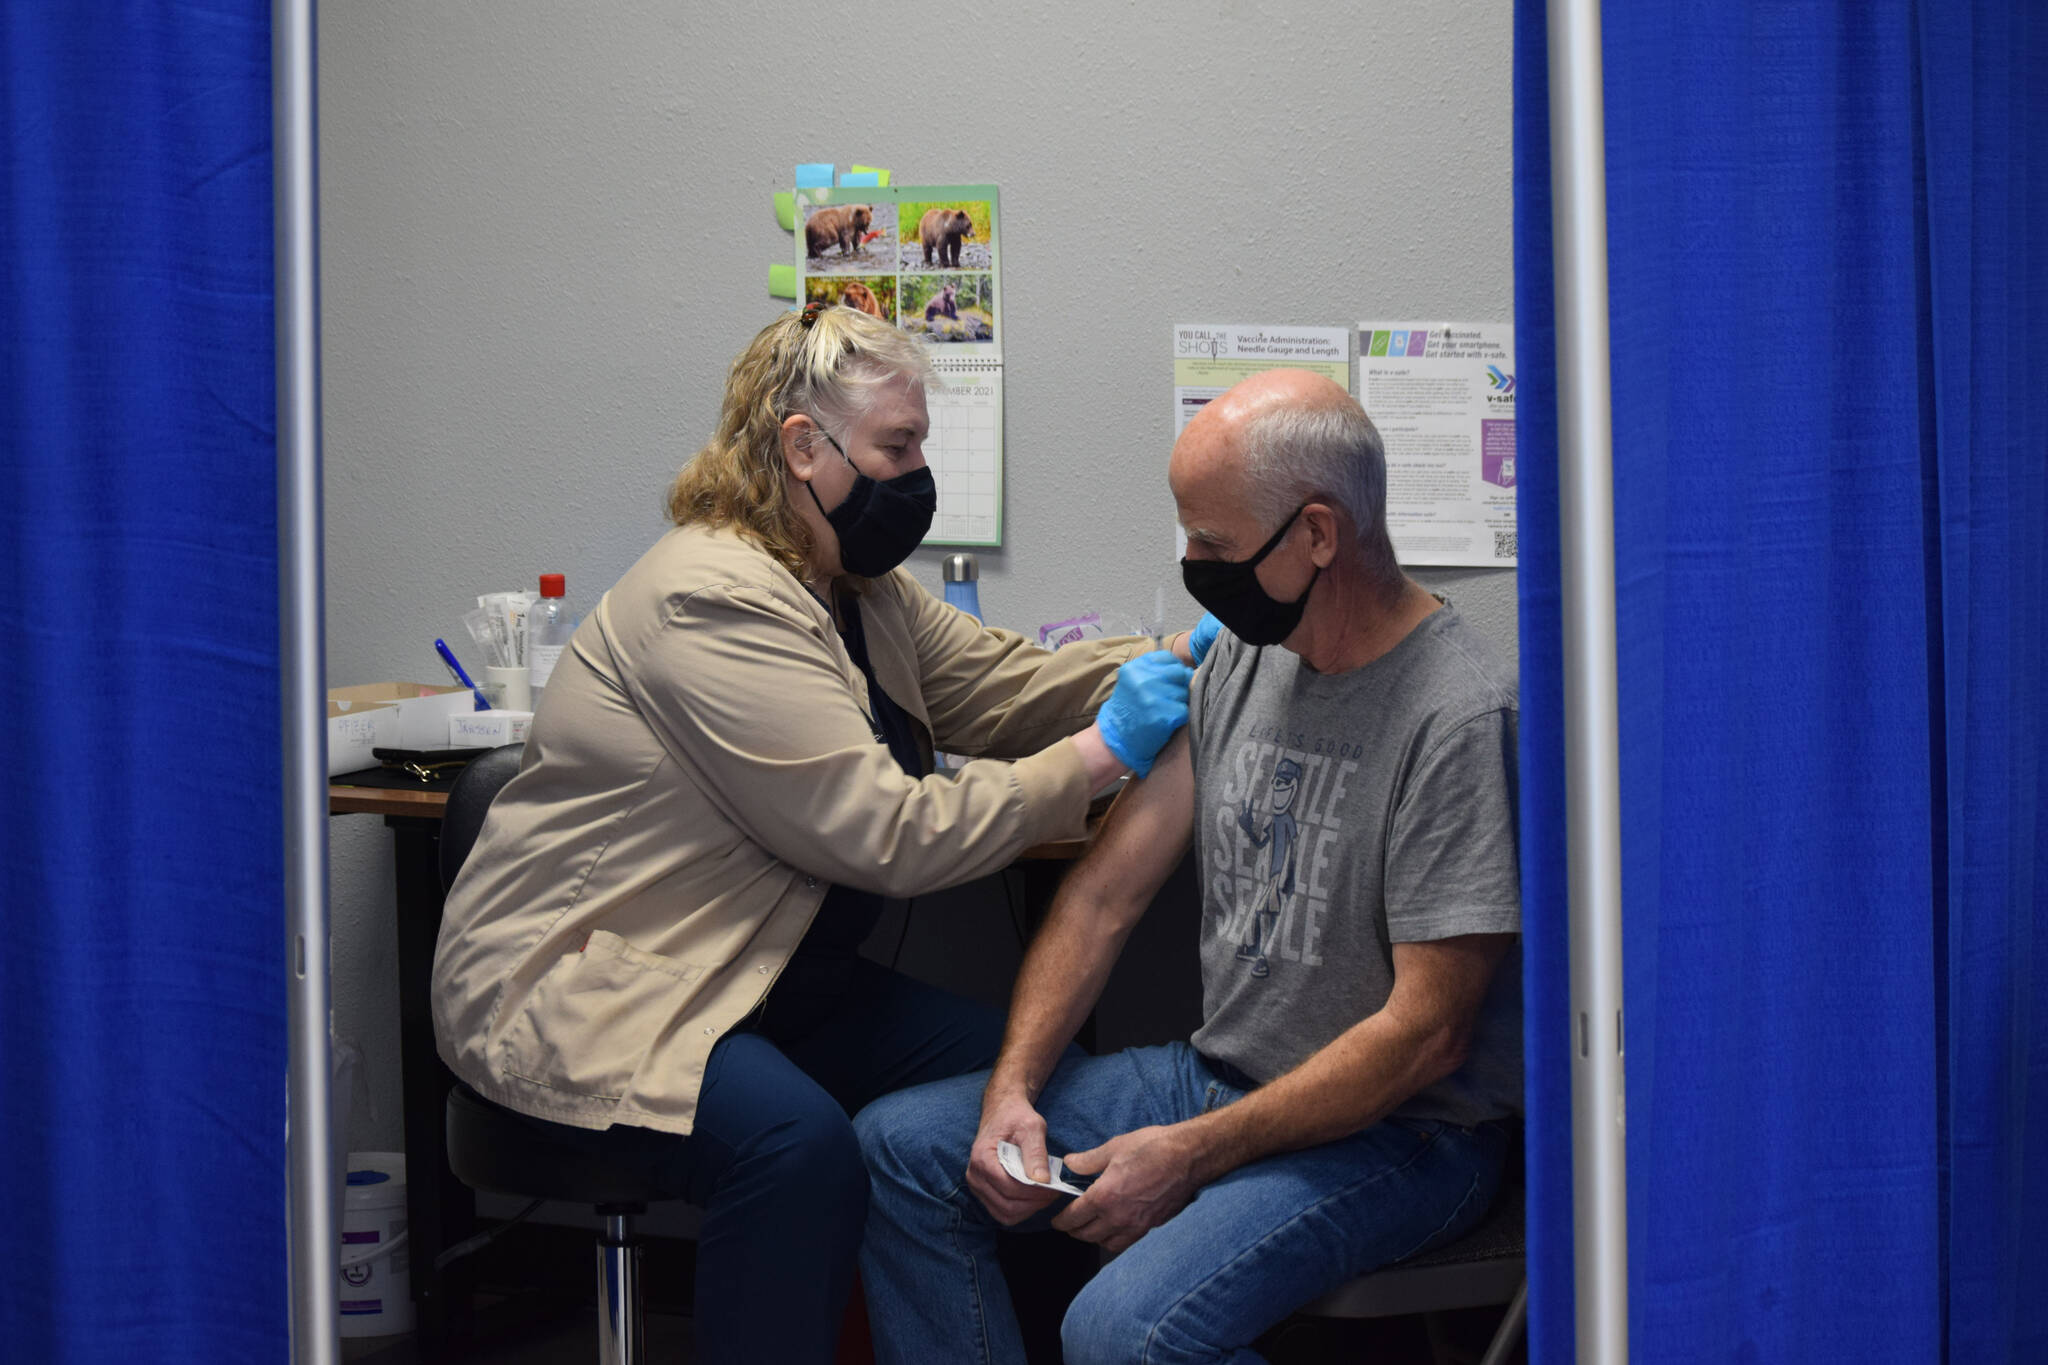 Nurse Linda Price gives Jim Blanning his Moderna COVID-19 booster shot at the “Y” intersection vaccine clinic on Thursday, Nov. 4, 2021. (Camille Botello/Peninsula Clarion)